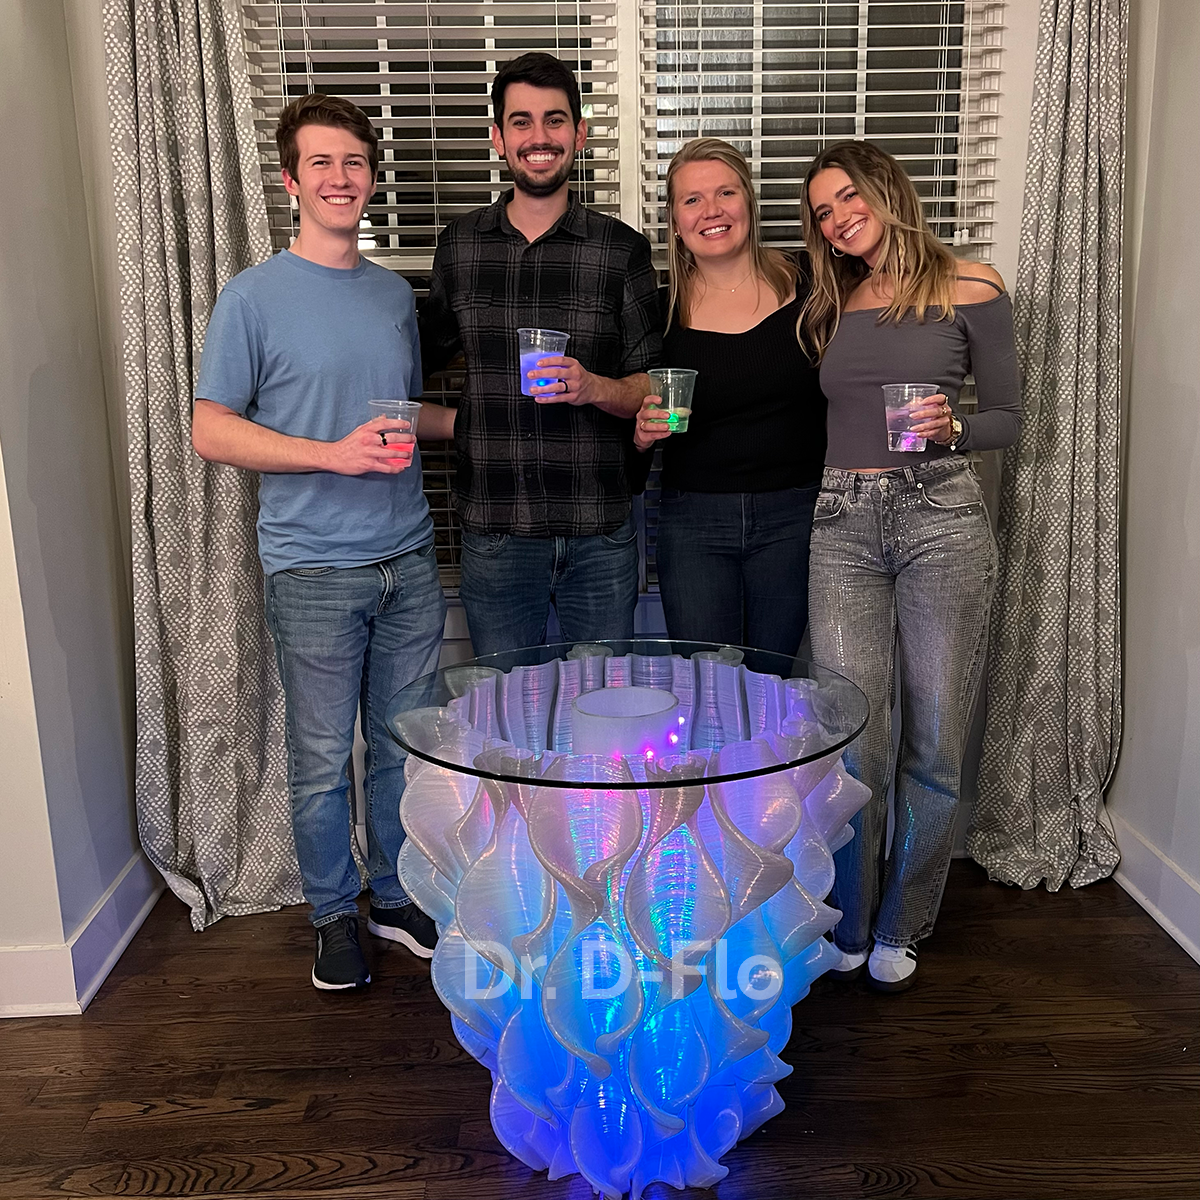 3D Printed LED Table with People Around It